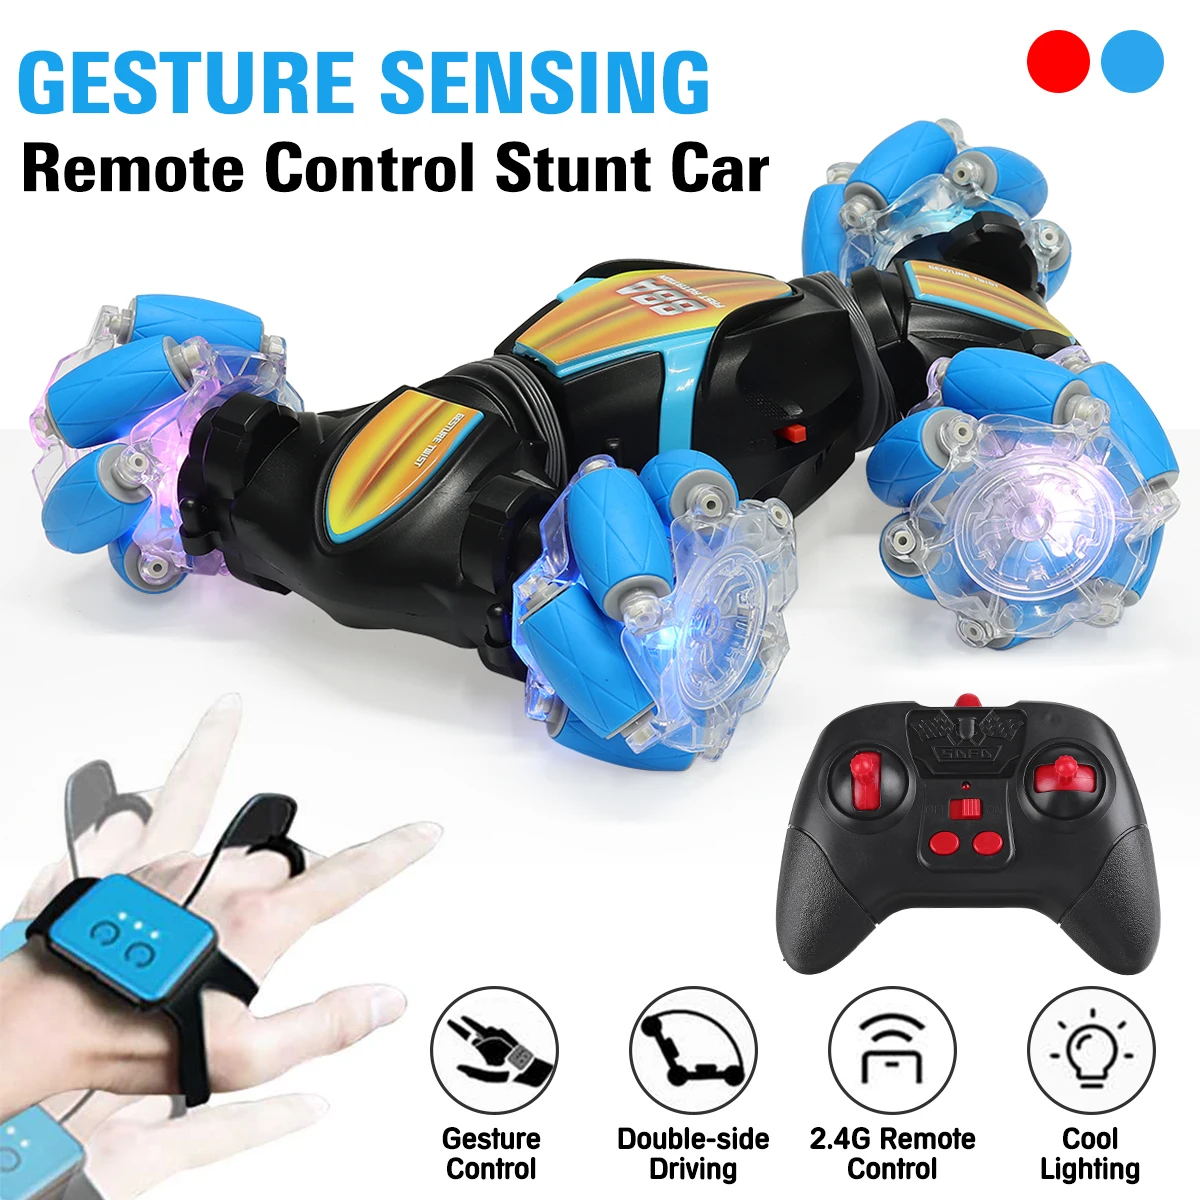 2.4G 4WD Gesture Sensing Car Remote Control Stunt Car 360° All-Round Drift Twisting Off-Road Dancing Vehicle Kids Toys W/ Lights 1